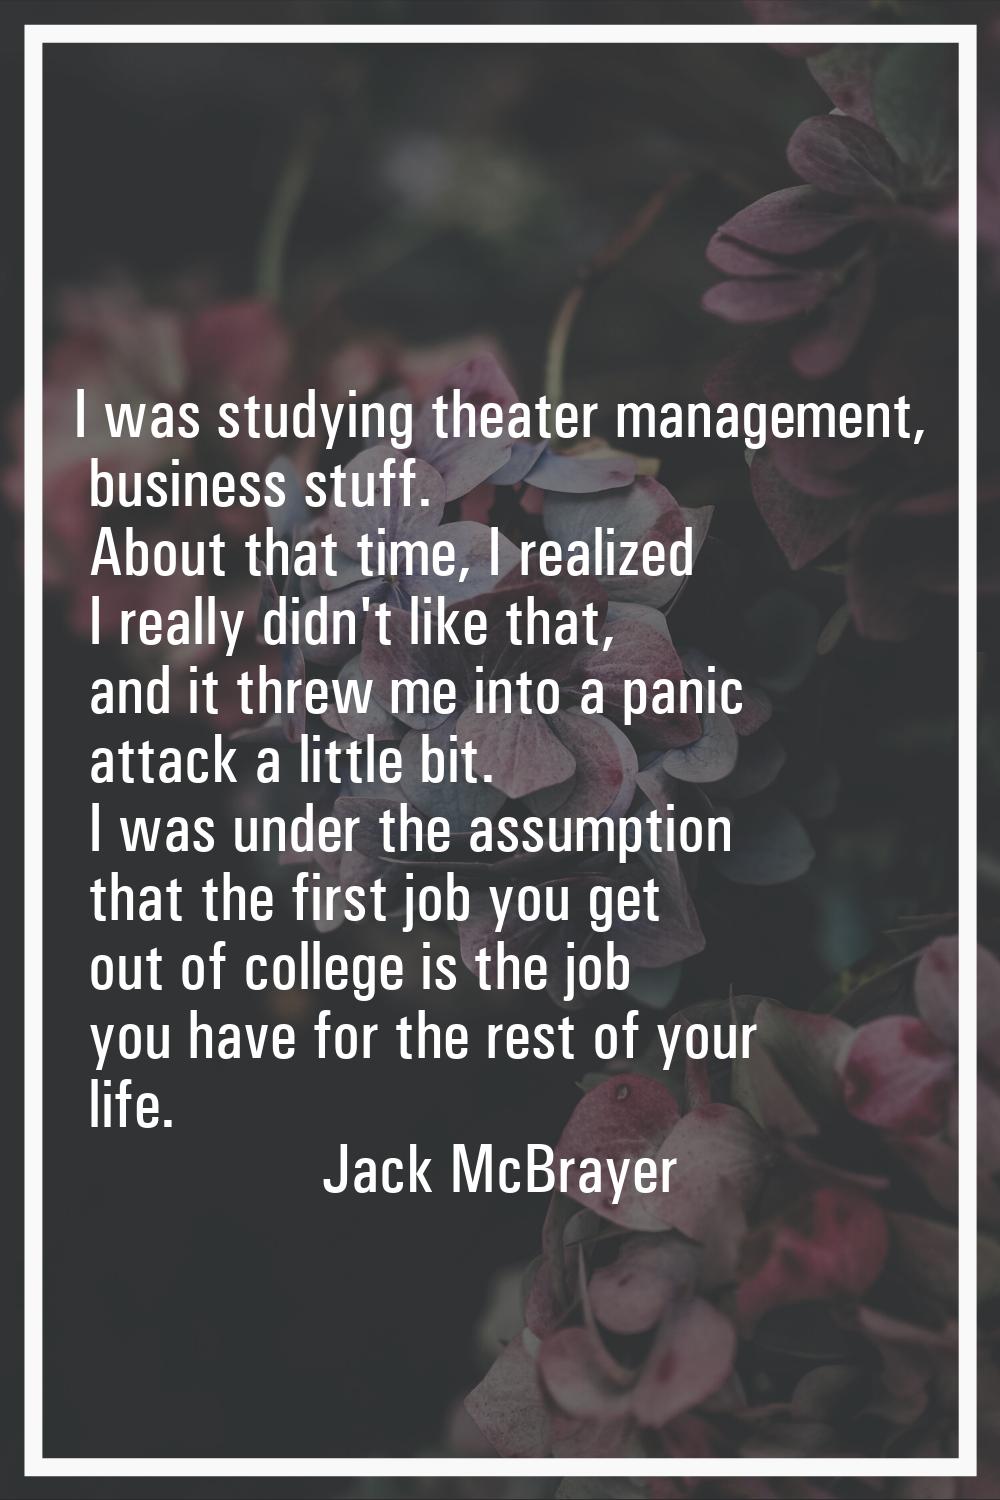 I was studying theater management, business stuff. About that time, I realized I really didn't like